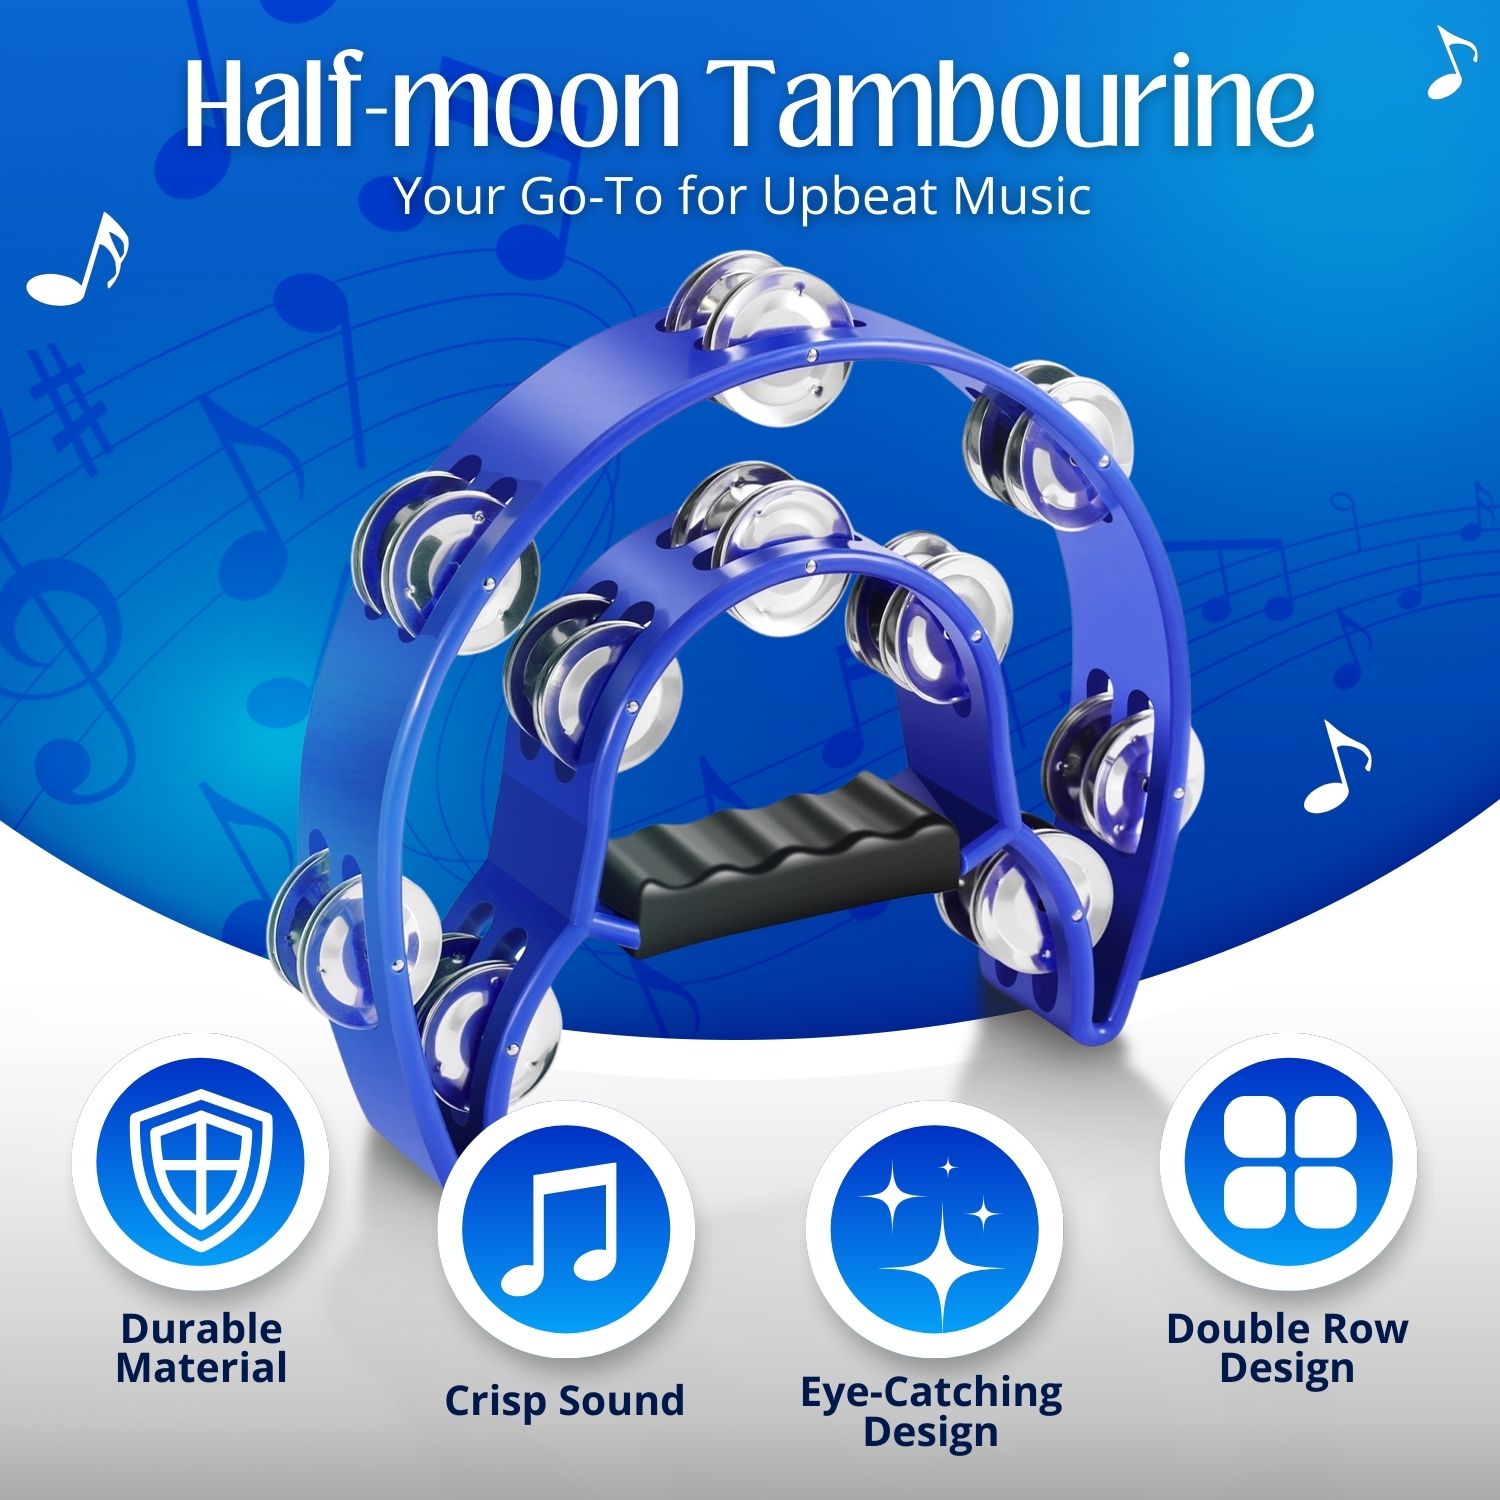 Metal Half Moon Design - The 10 inch tambourine has an ergonomic grip that makes it easy to hold and a steady grip. They are suitable for playing a wide range of music styles, including jazz, classical, hip-hop,  rock 'n' roll, and church hymns